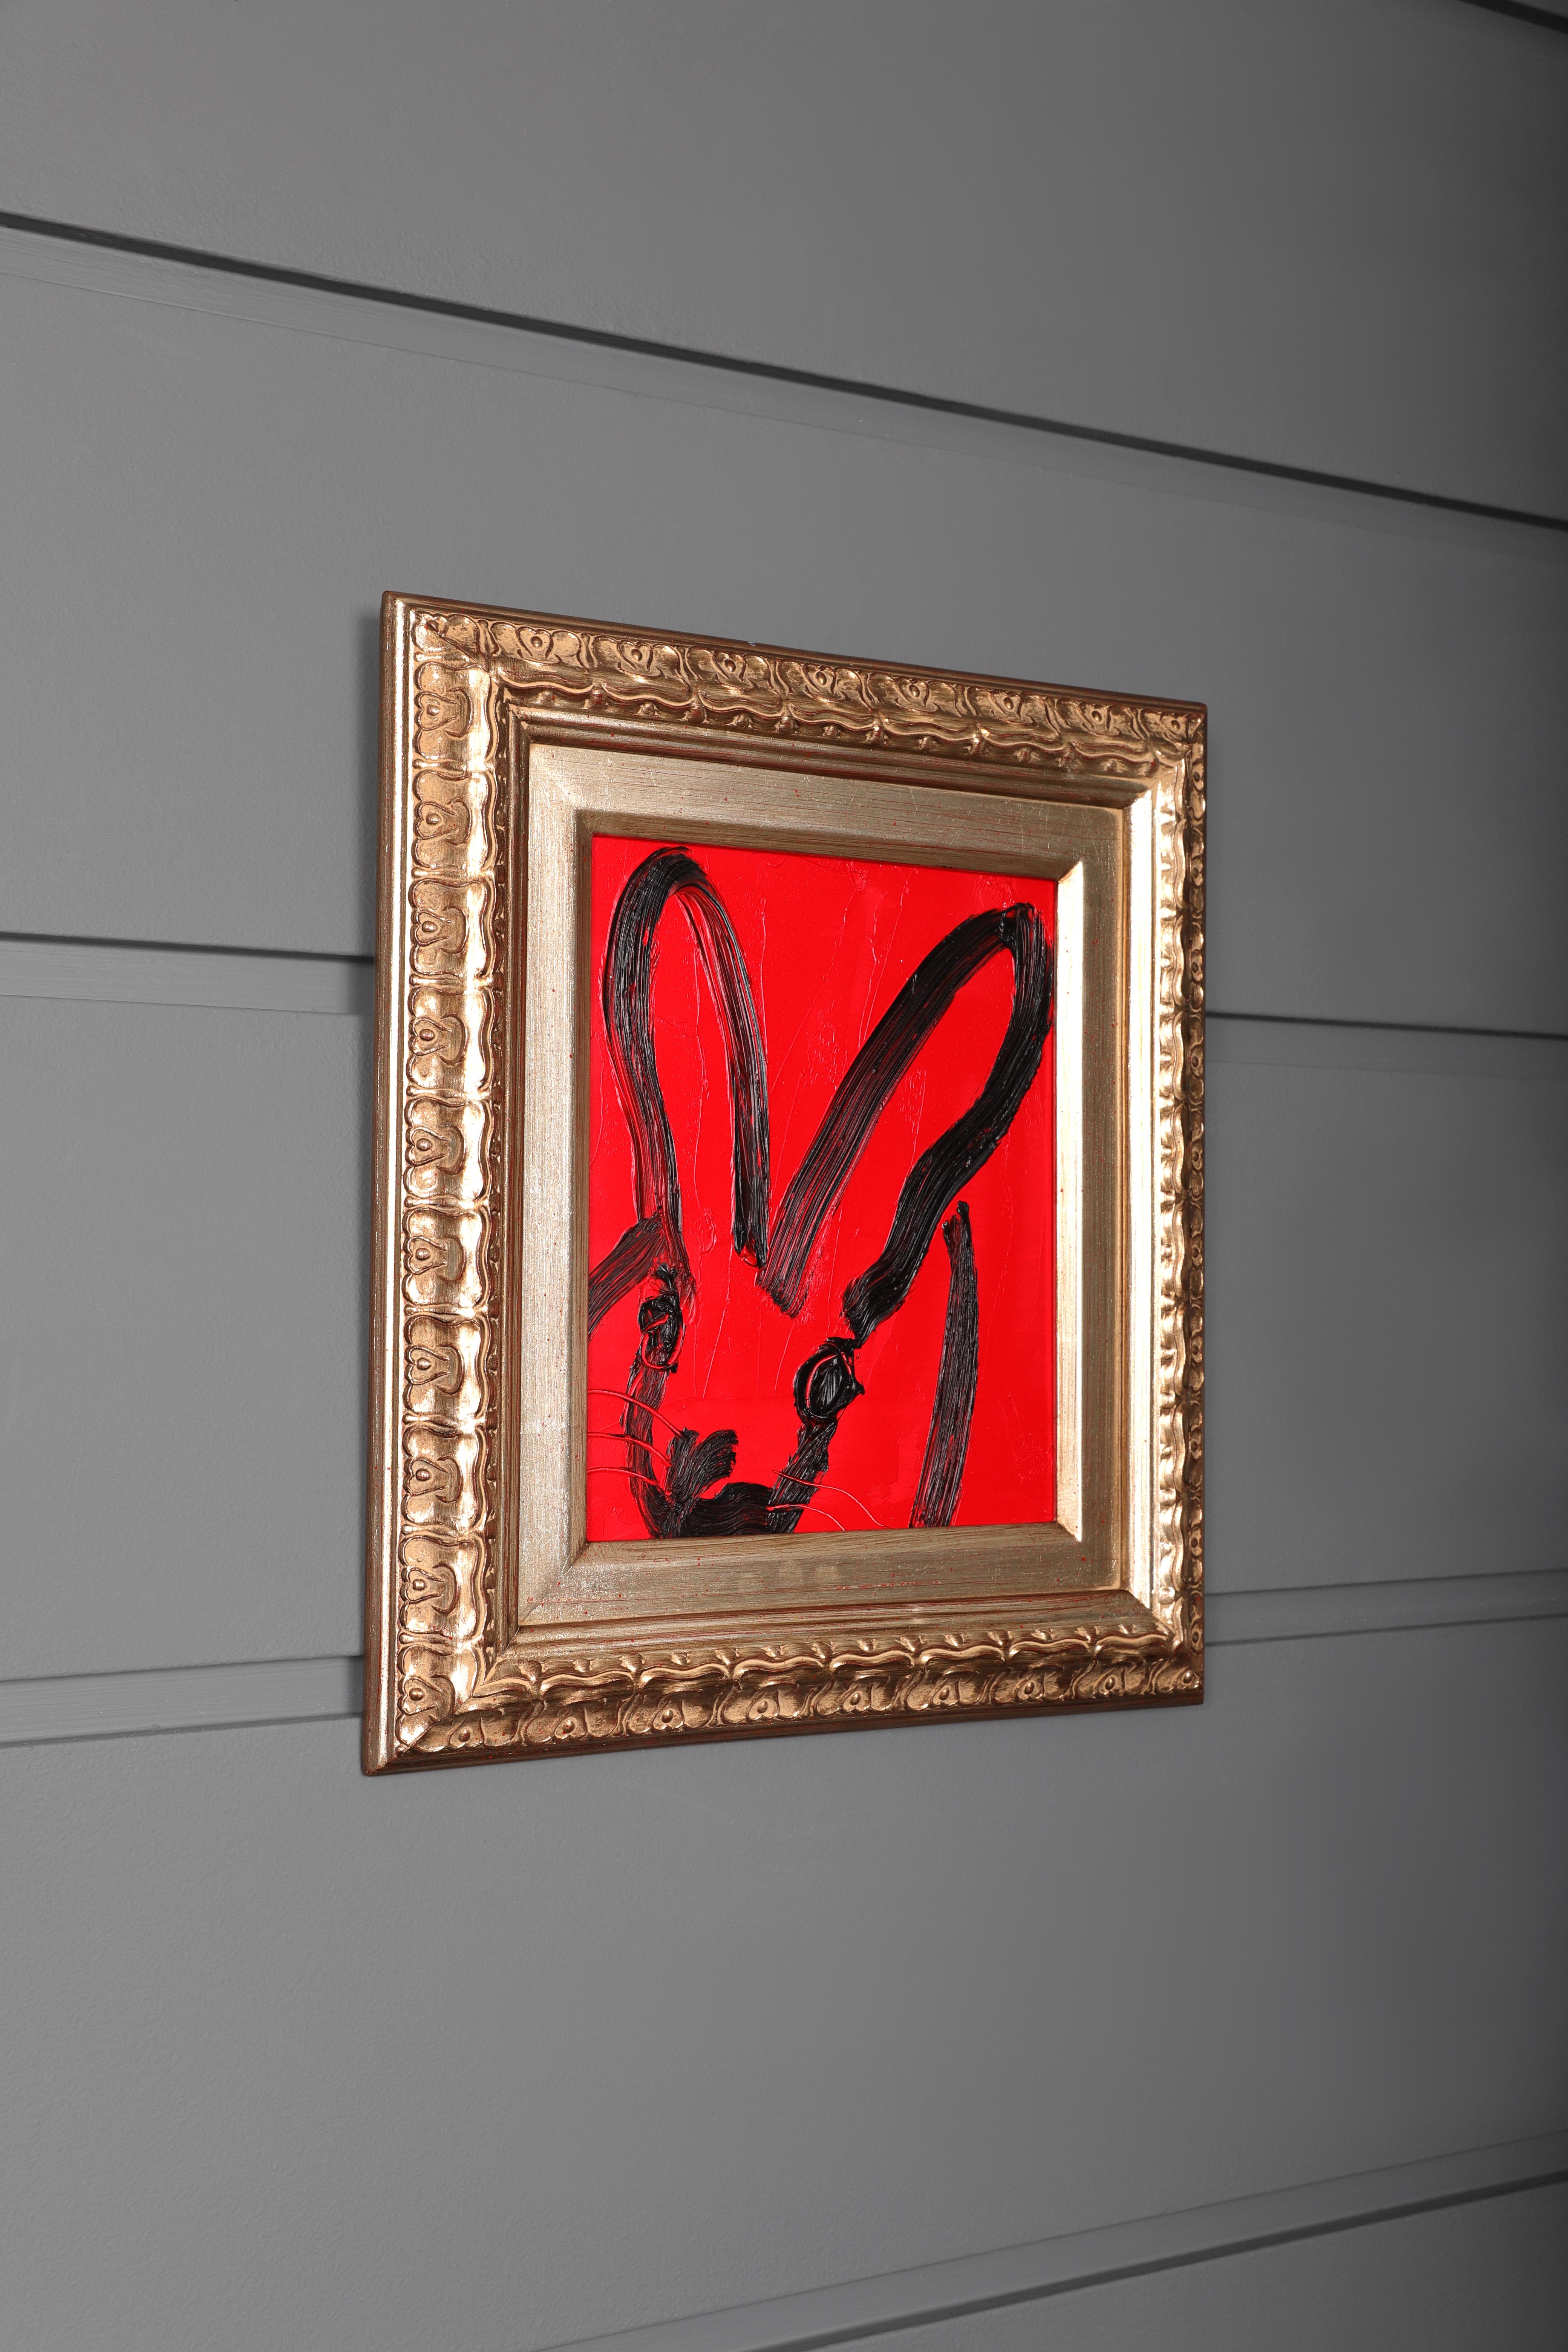 ‘Red Bunny’ is a signature gestural bunny painting by Hunt Slonem. The gestural bunny can be found throughout Slonem’s Neo-expressionist body of work. The background of the painting is a rich, bold red, contrasting the black line that defines the